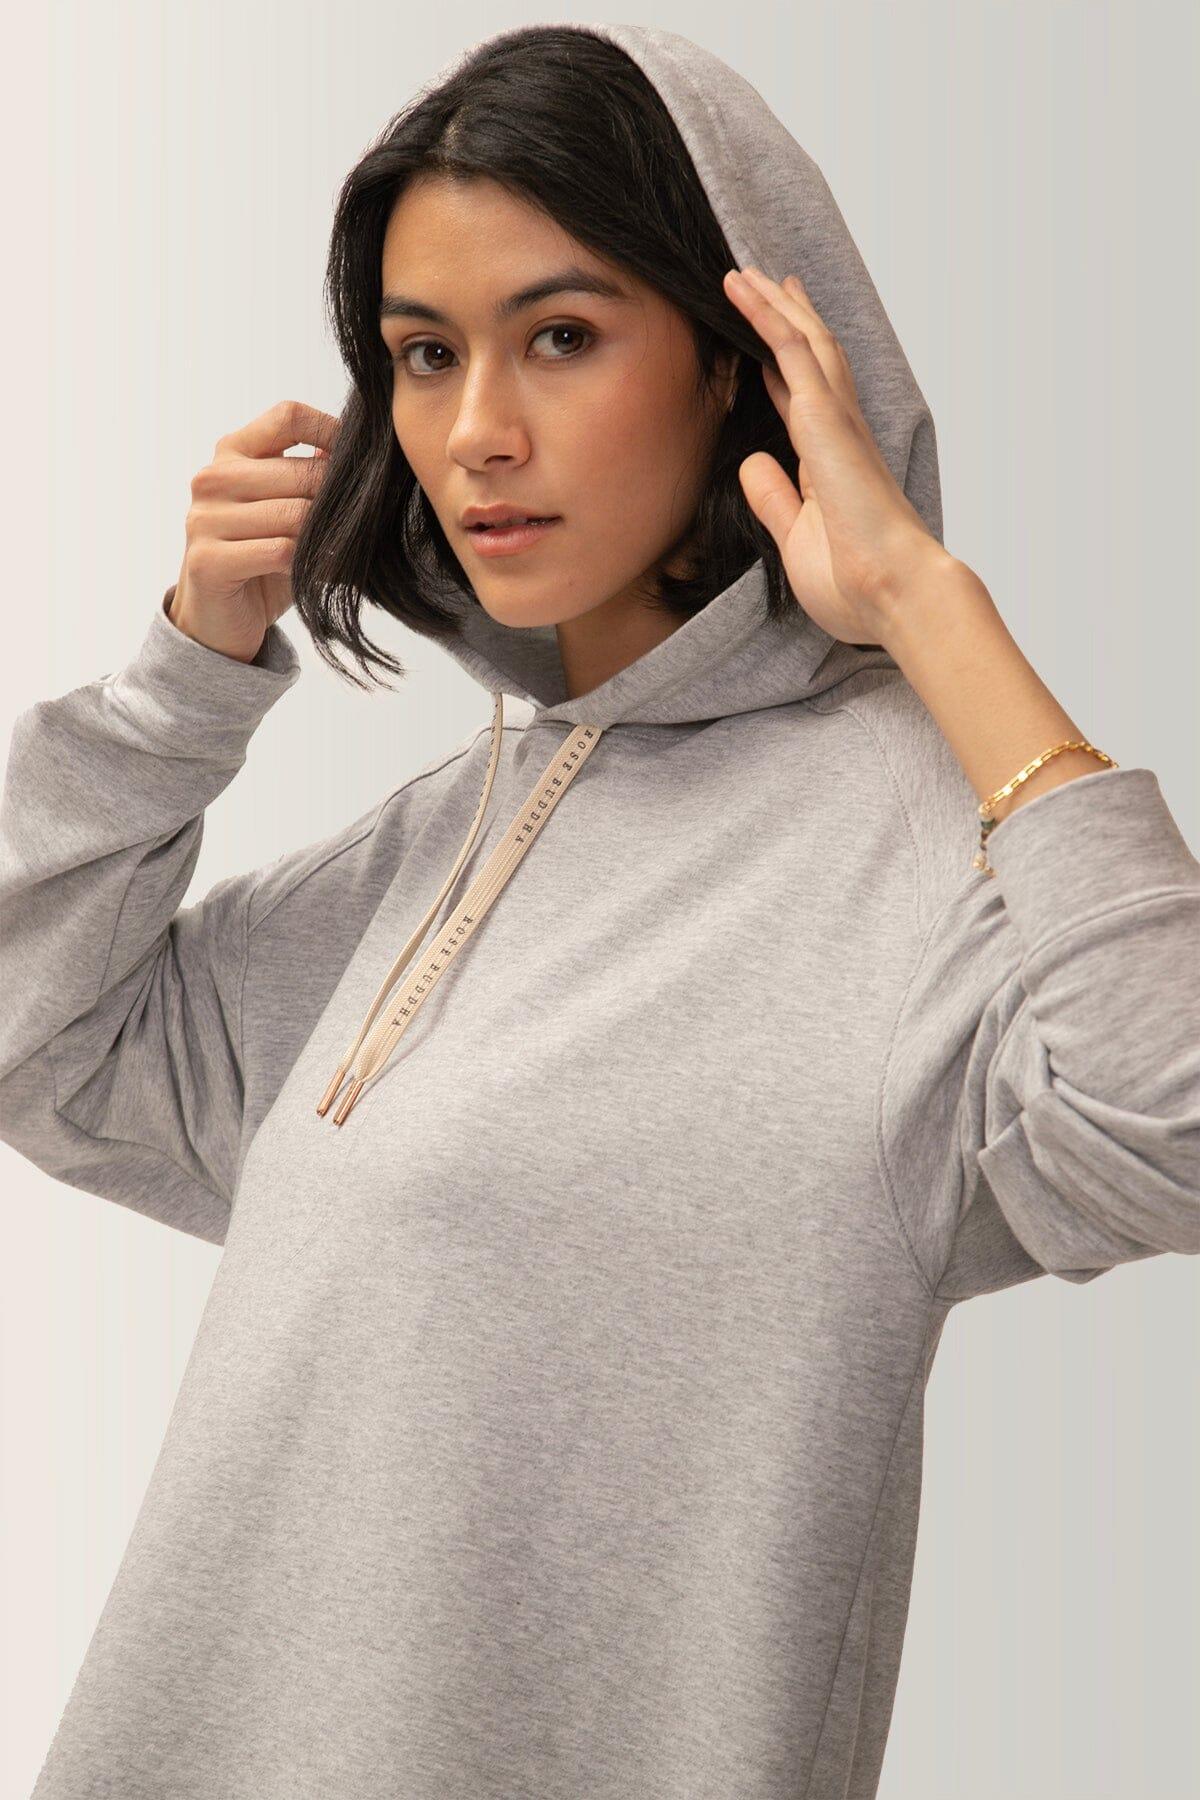 Femme qui porte le chandail Chill out de Rose Boreal./ Women wearing the Chill Out Hoodie by Rose Boreal. -Moon / Lune